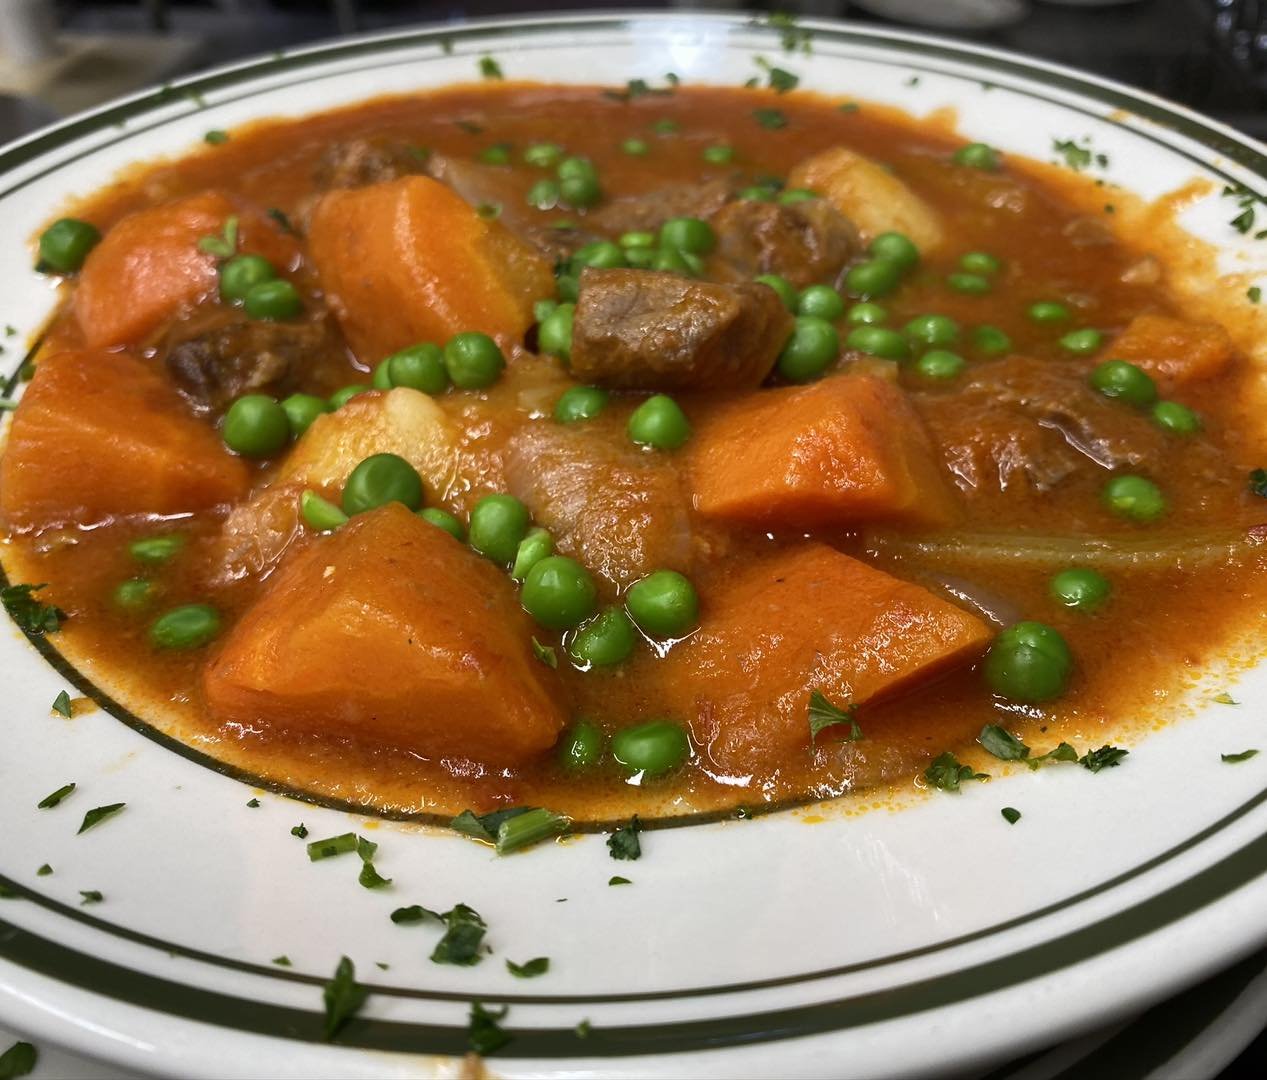 Order Beef Stew before it&rsquo;s all gone today!

#beefstew